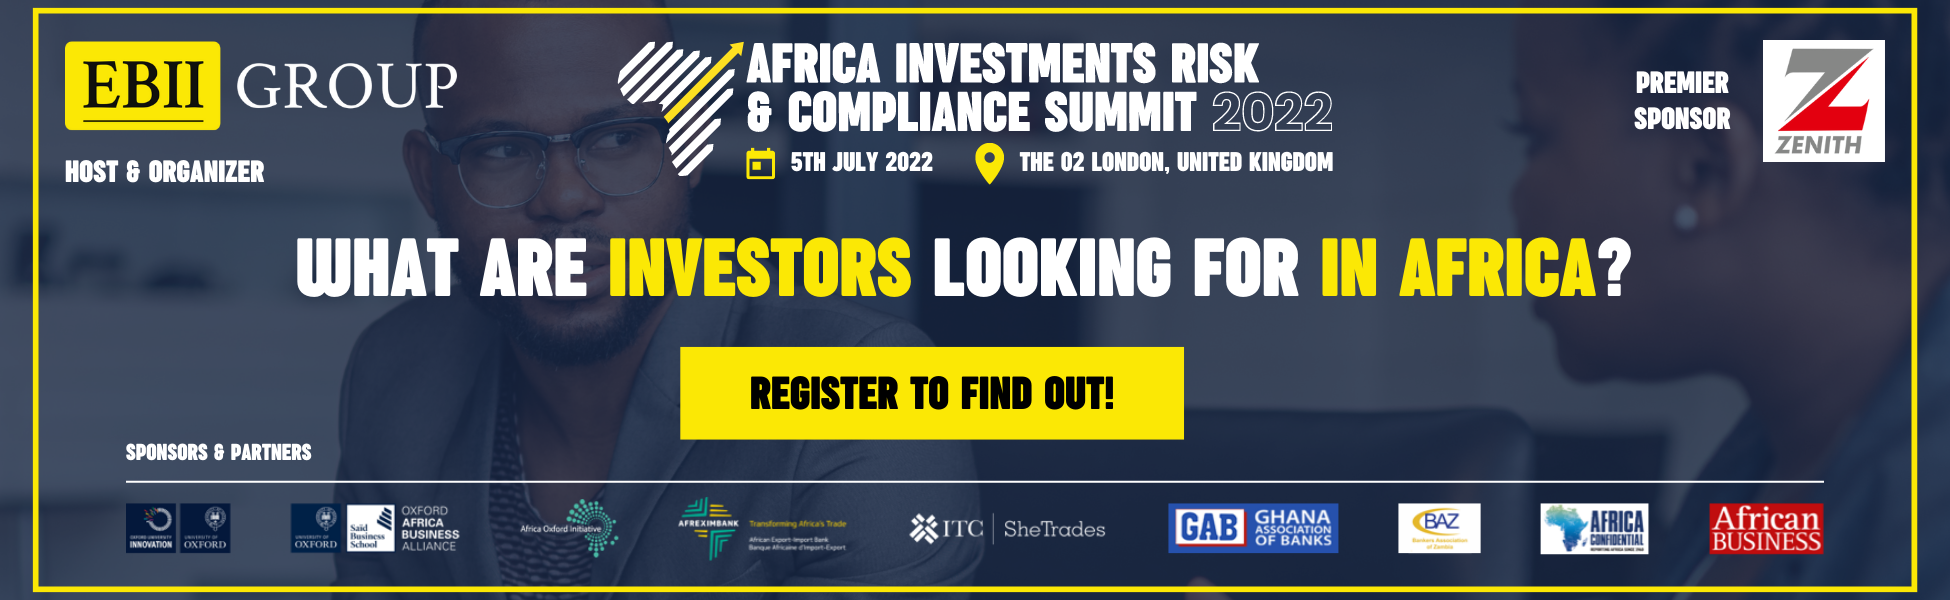 Africa Investment Risk and Compliance Summit 2022